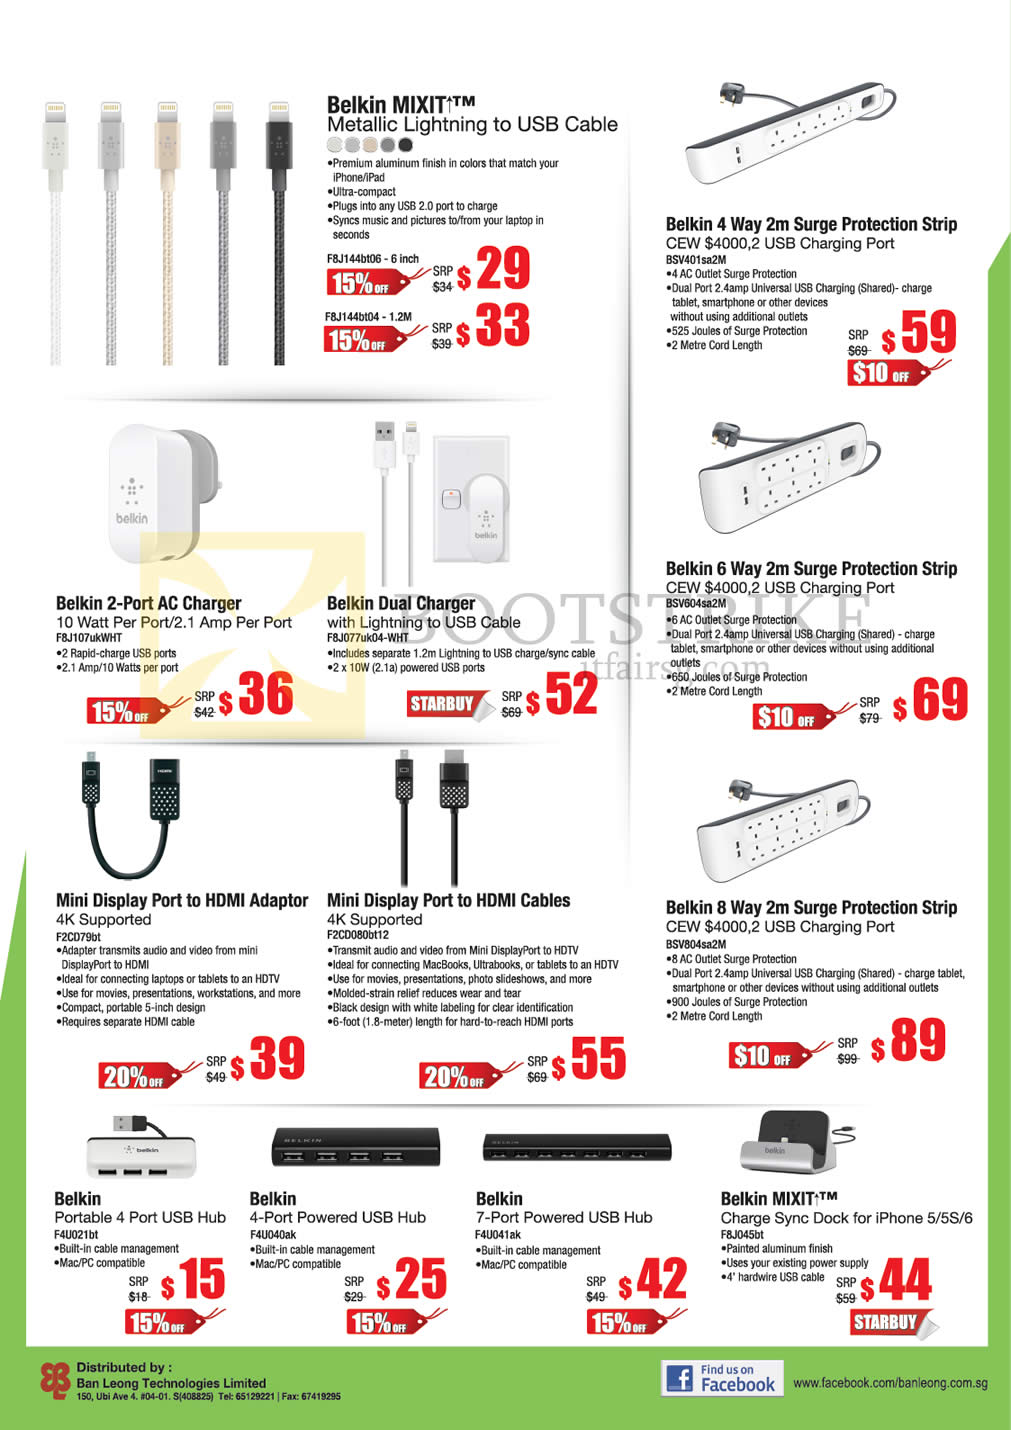 COMEX 2015 price list image brochure of Belkin Mixit Lightning To USB Cable, Surge Protection Strips, Dual Charger, AC Charger, Mini Display Port To HDMI Adapter, Charge Sync Dock, Powered USB Hub